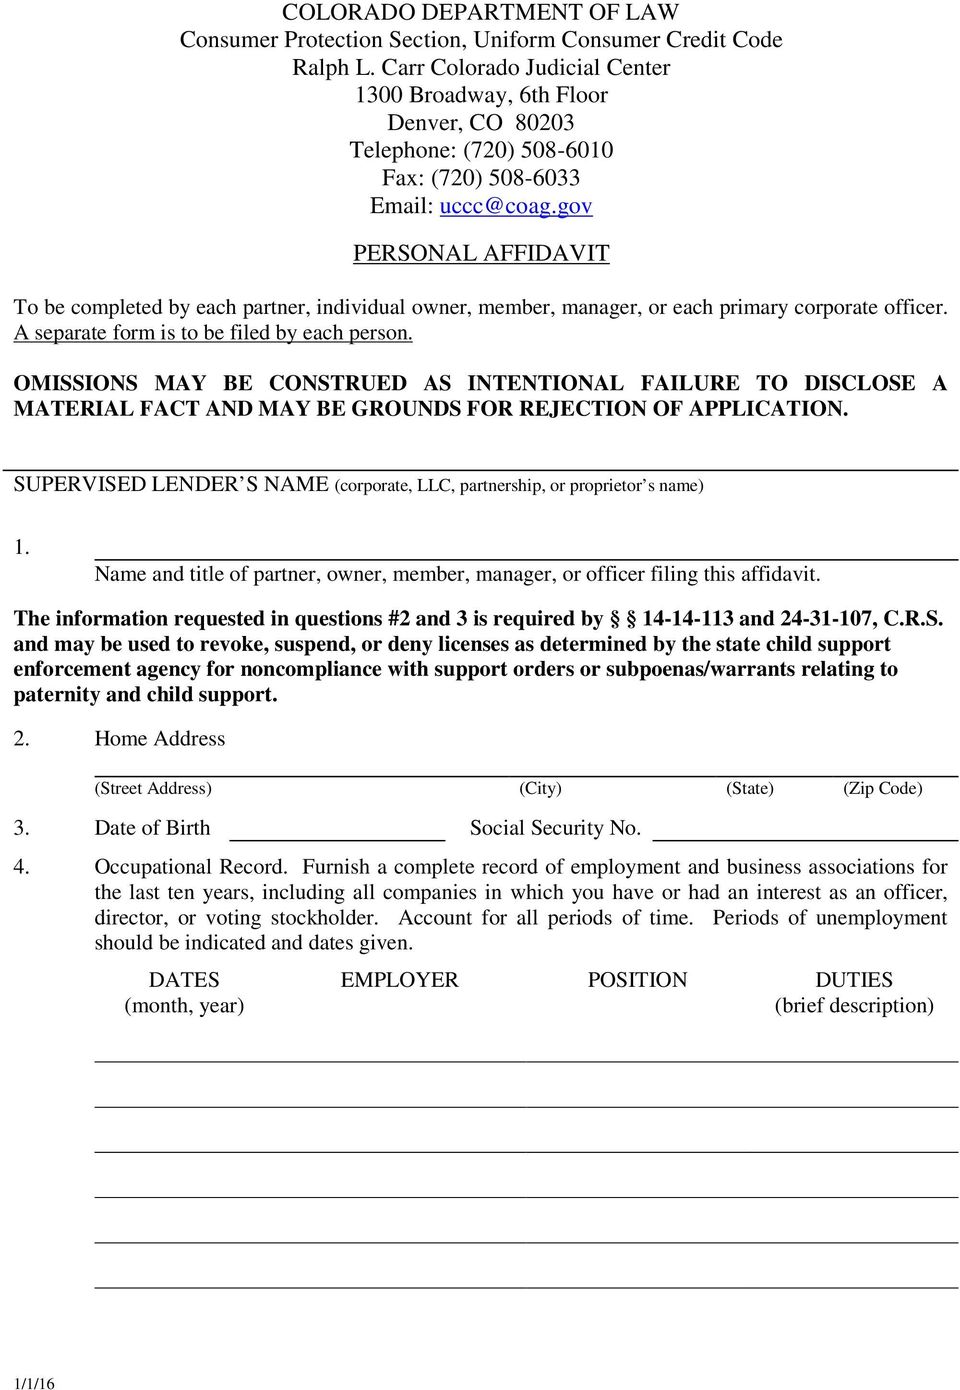 gov PERSONAL AFFIDAVIT To be completed by each partner, individual owner, member, manager, or each primary corporate officer. A separate form is to be filed by each person.